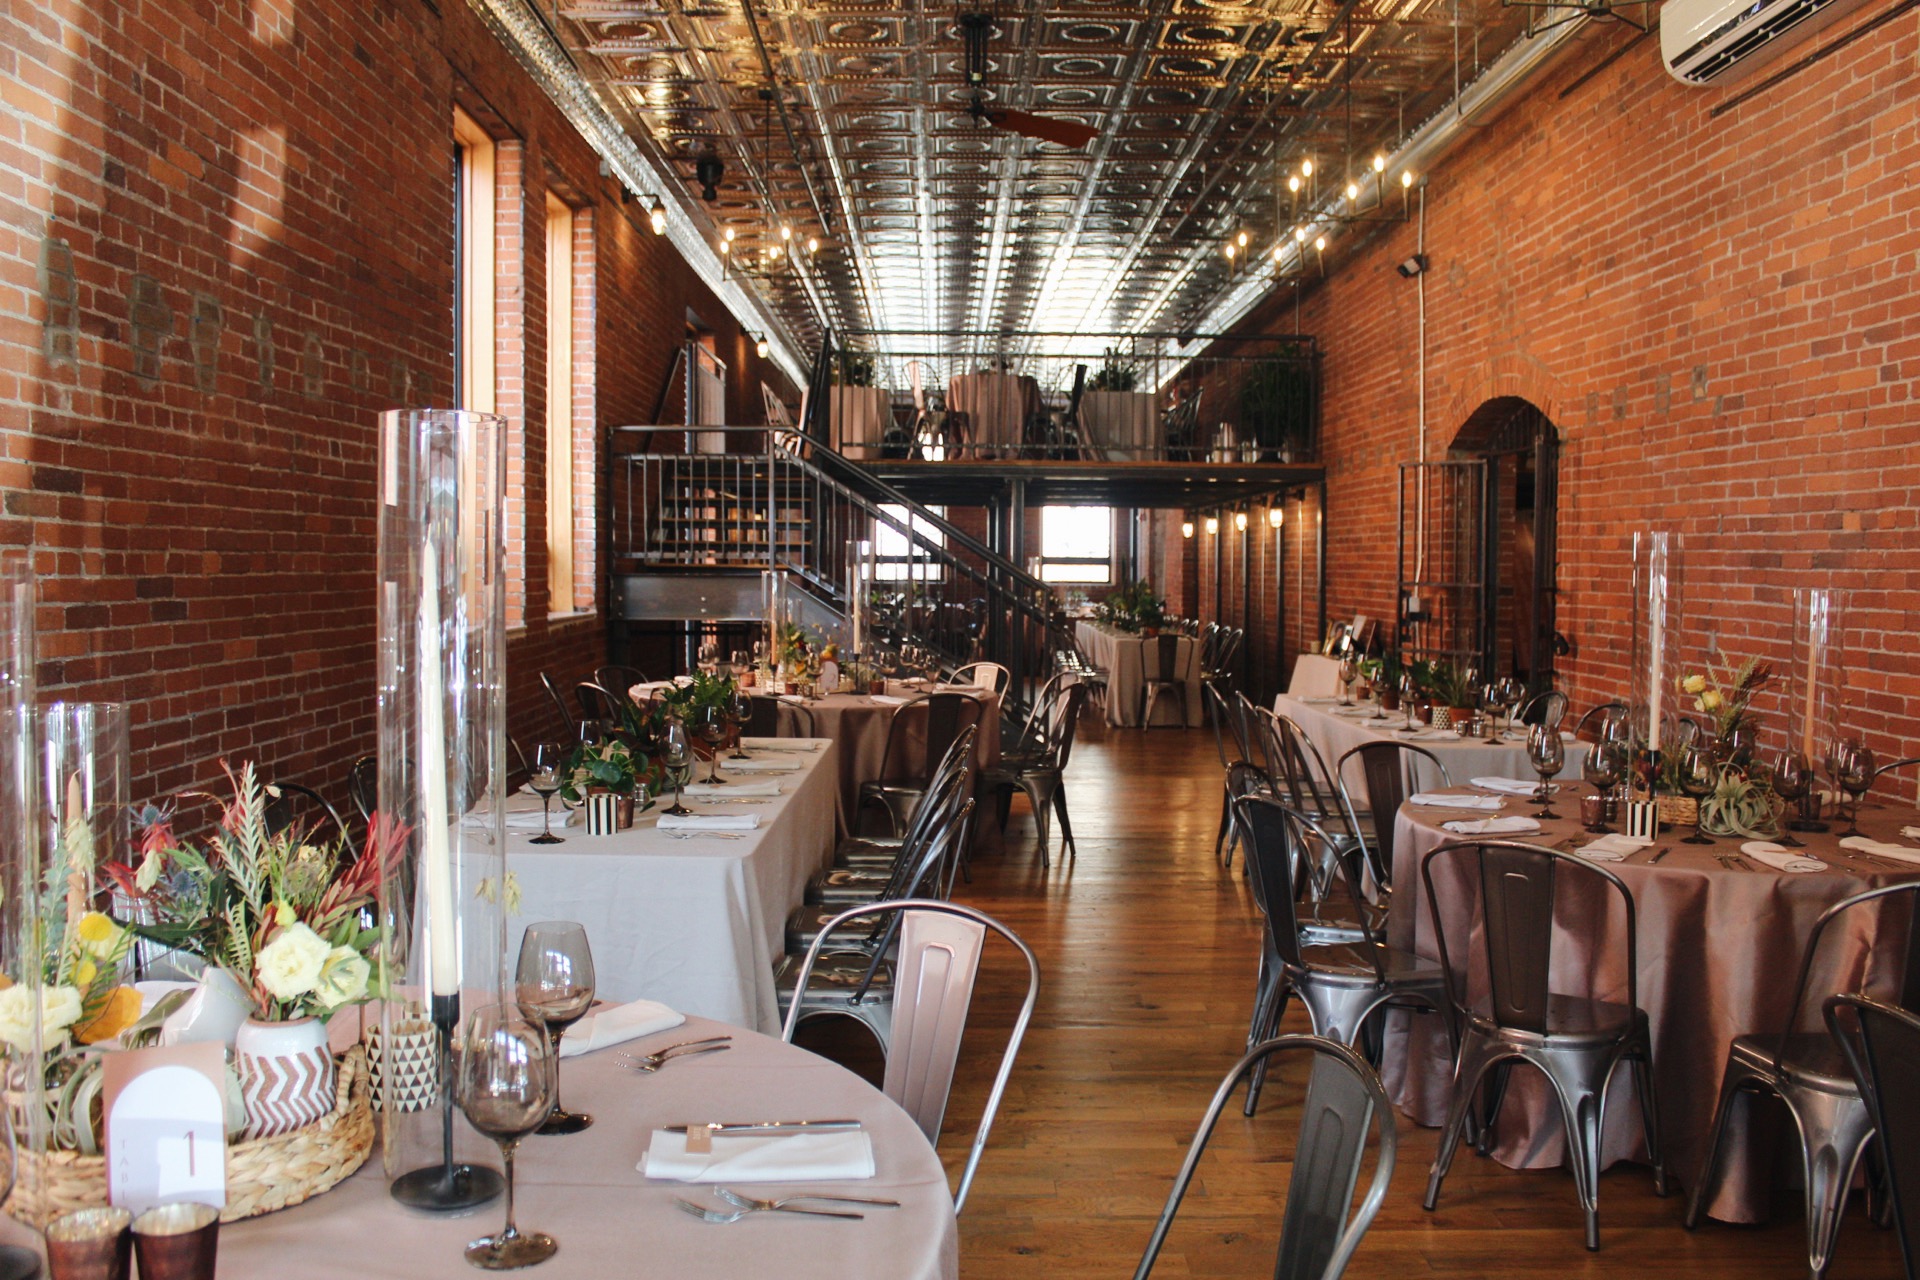 The Art Room is a unique event space that juxtaposes industrial decor with fine art.